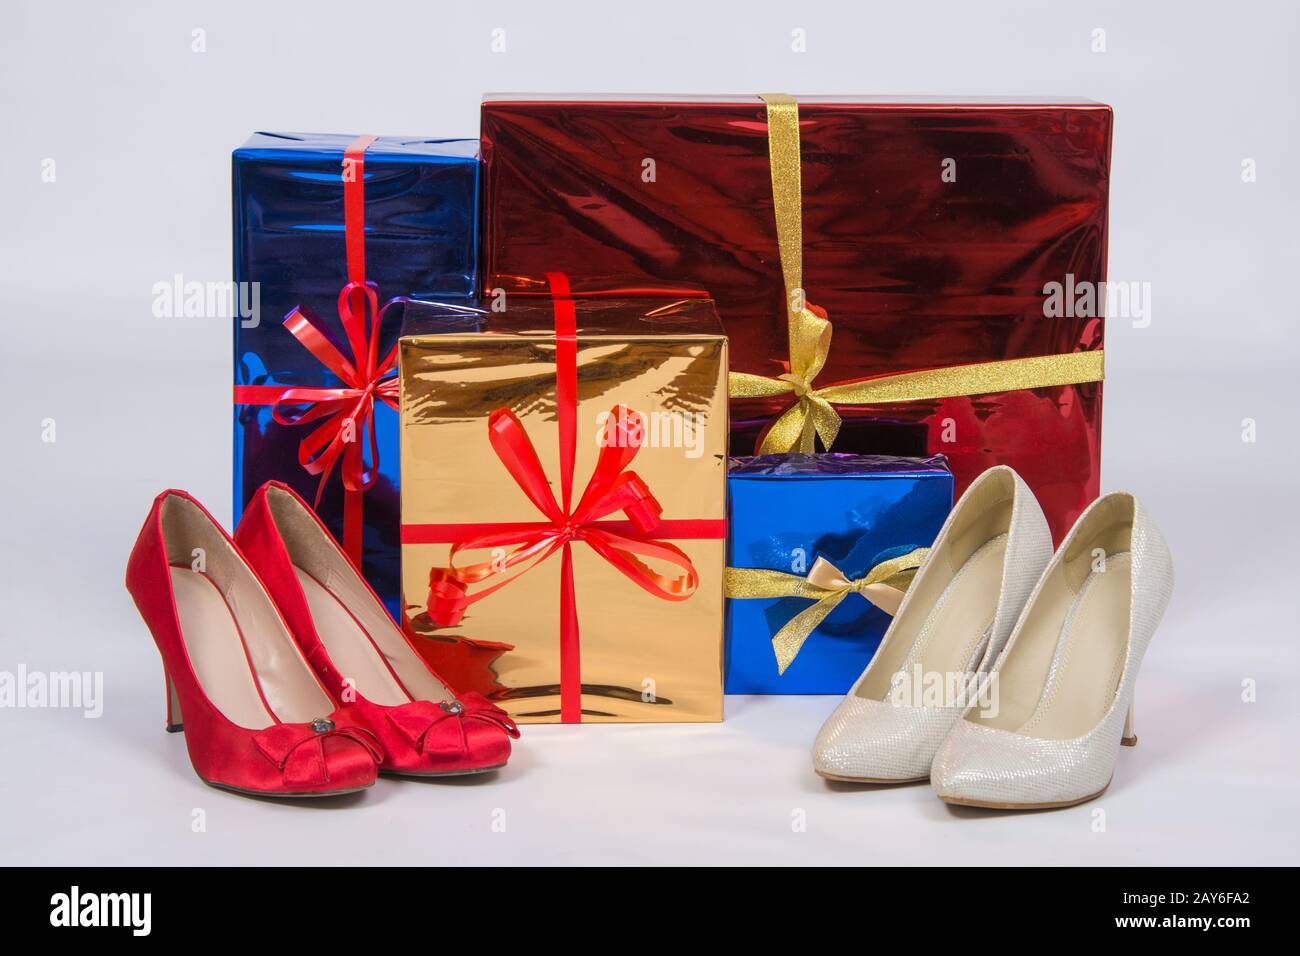 Red and white female shoes with high heels, standing near boxes with gifts Stock Photo